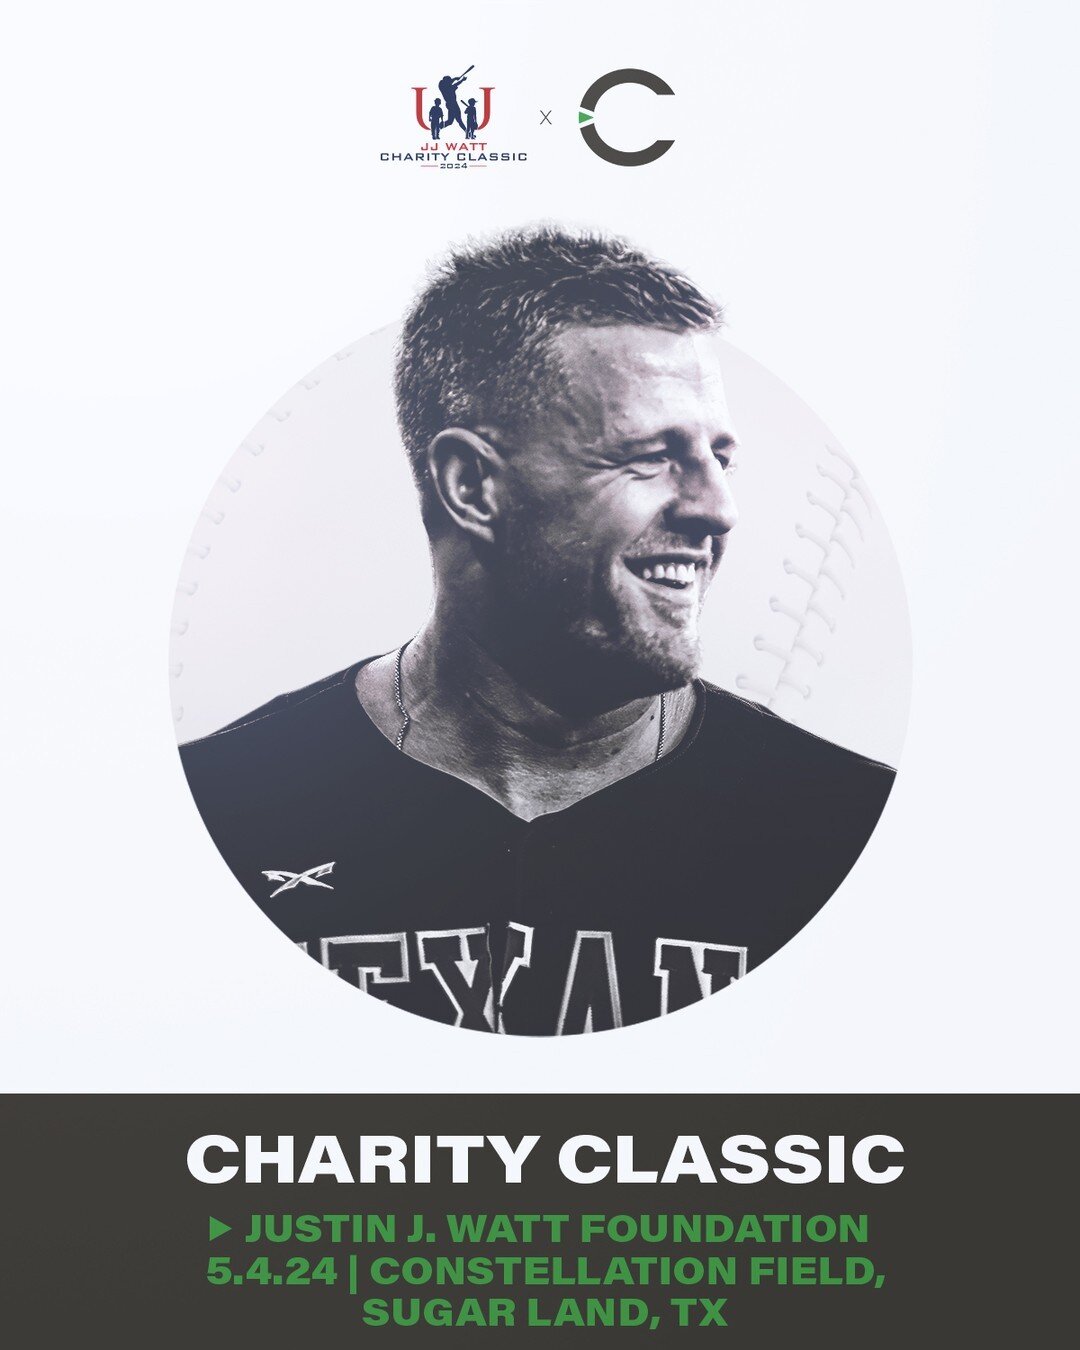 Guess who's back, back again...the JJ Watt Charity Classic returns to Sugar Land, Texas on May 4th ‼️ 

Capture is proud to help the JJ Watt Foundation put on this iconic event for the community in Texas and help support the mission of funding equipm